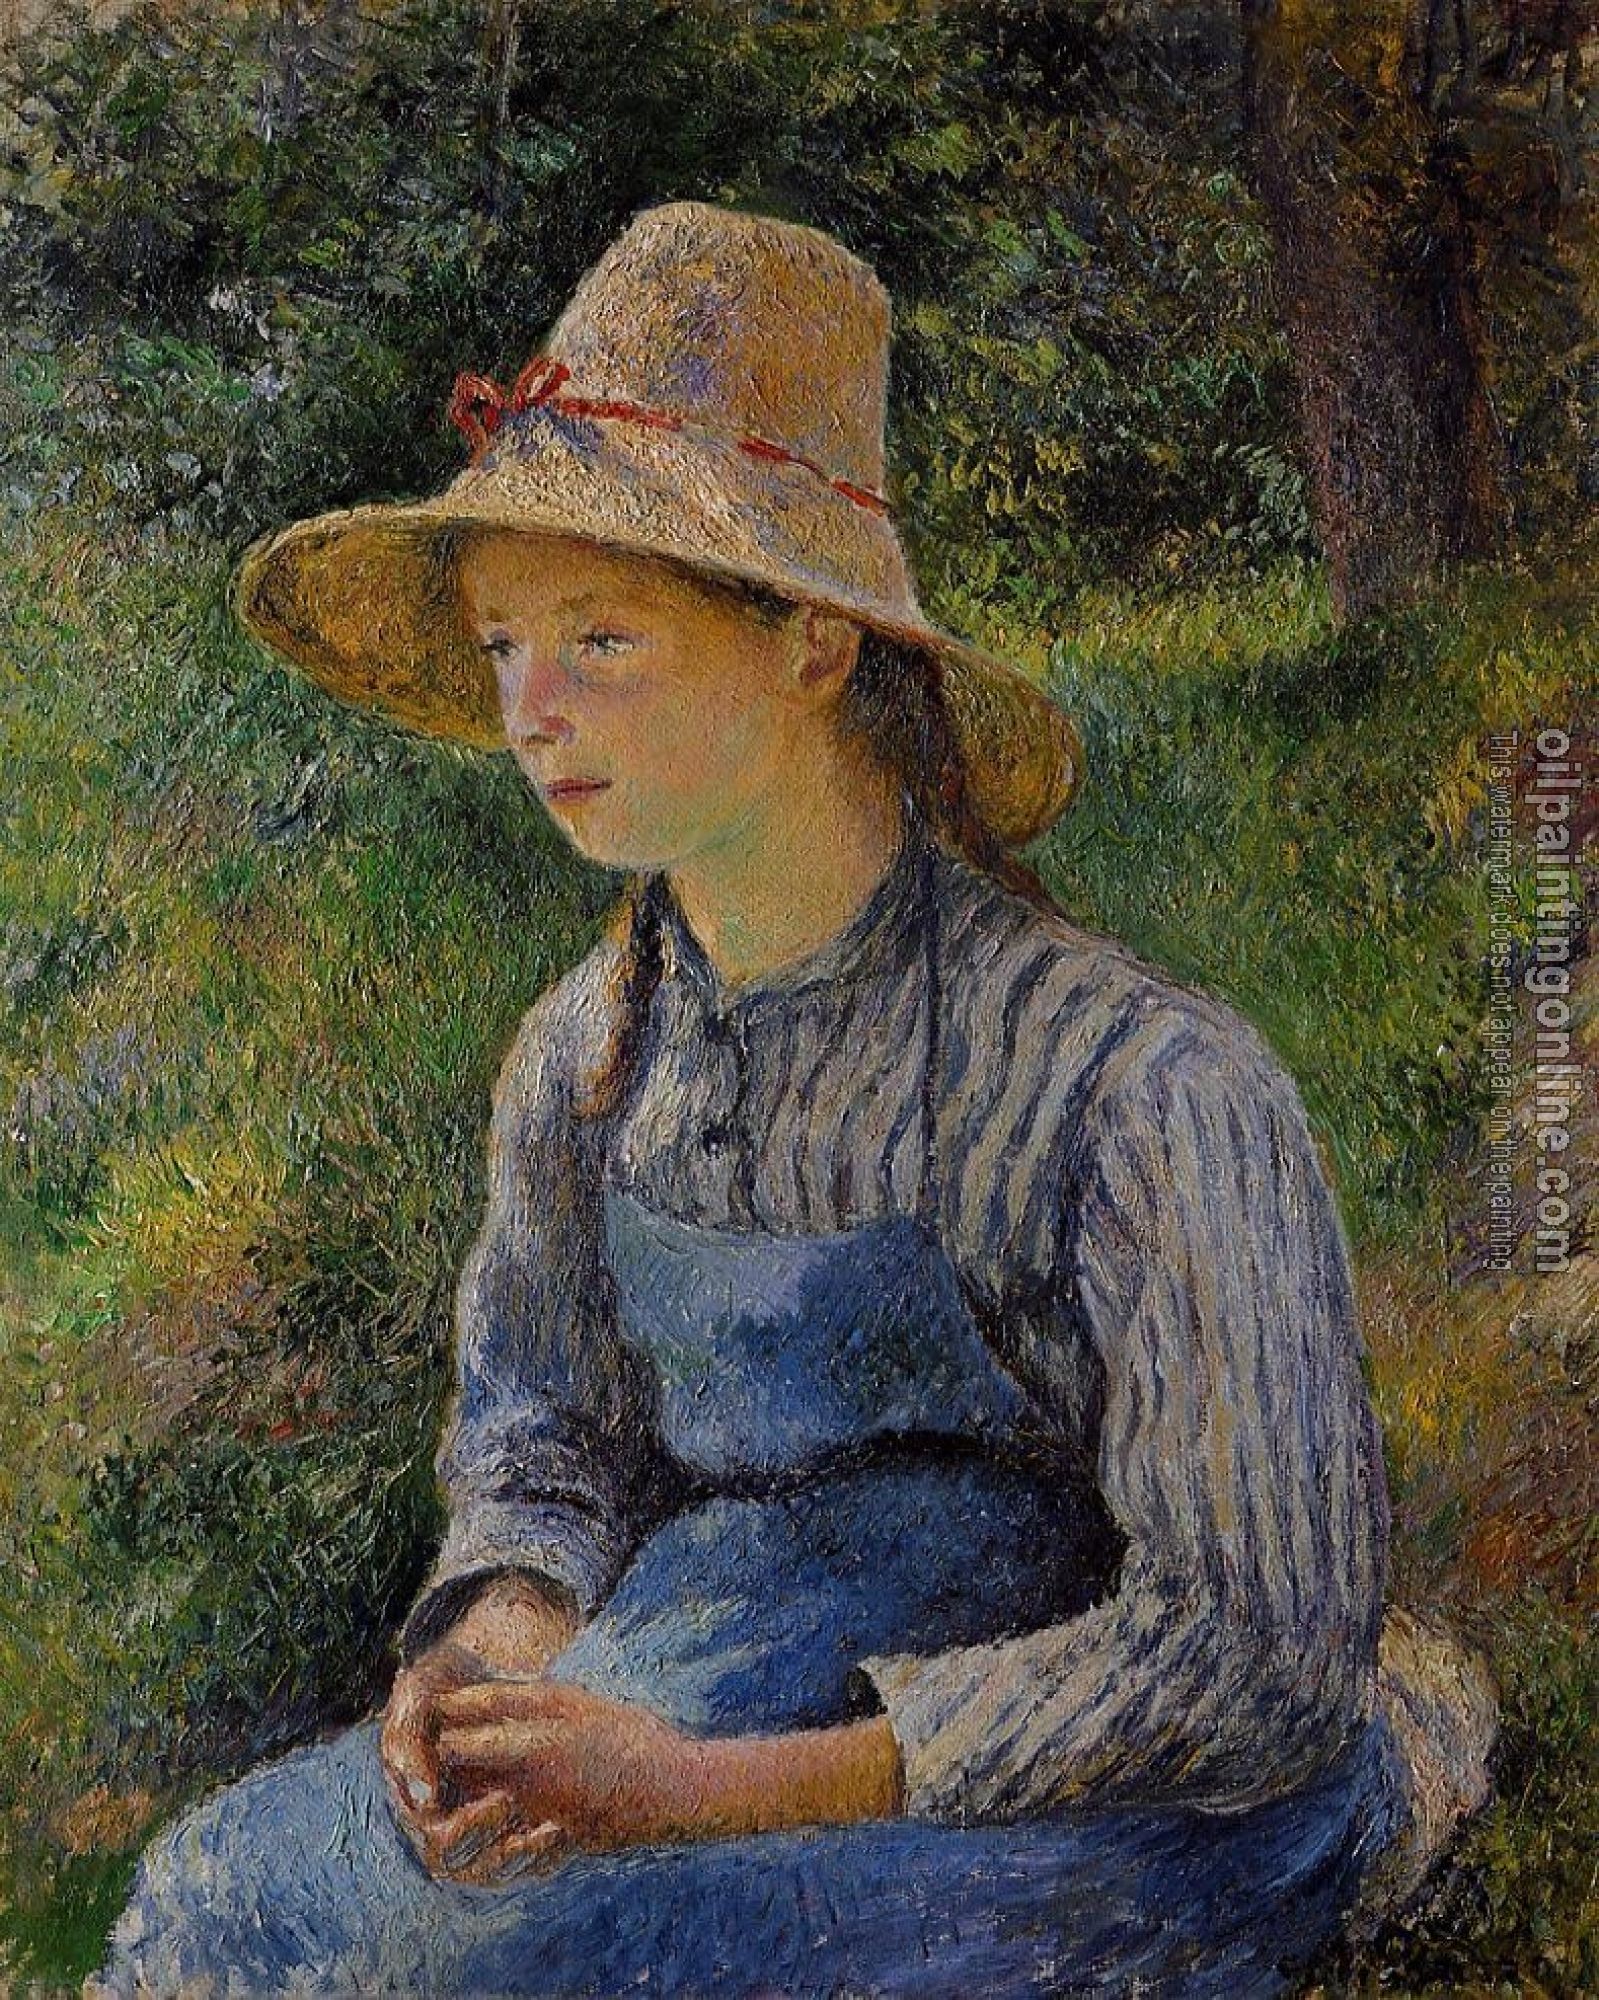 Pissarro, Camille - Young Peasant Girl Wearing a Hat